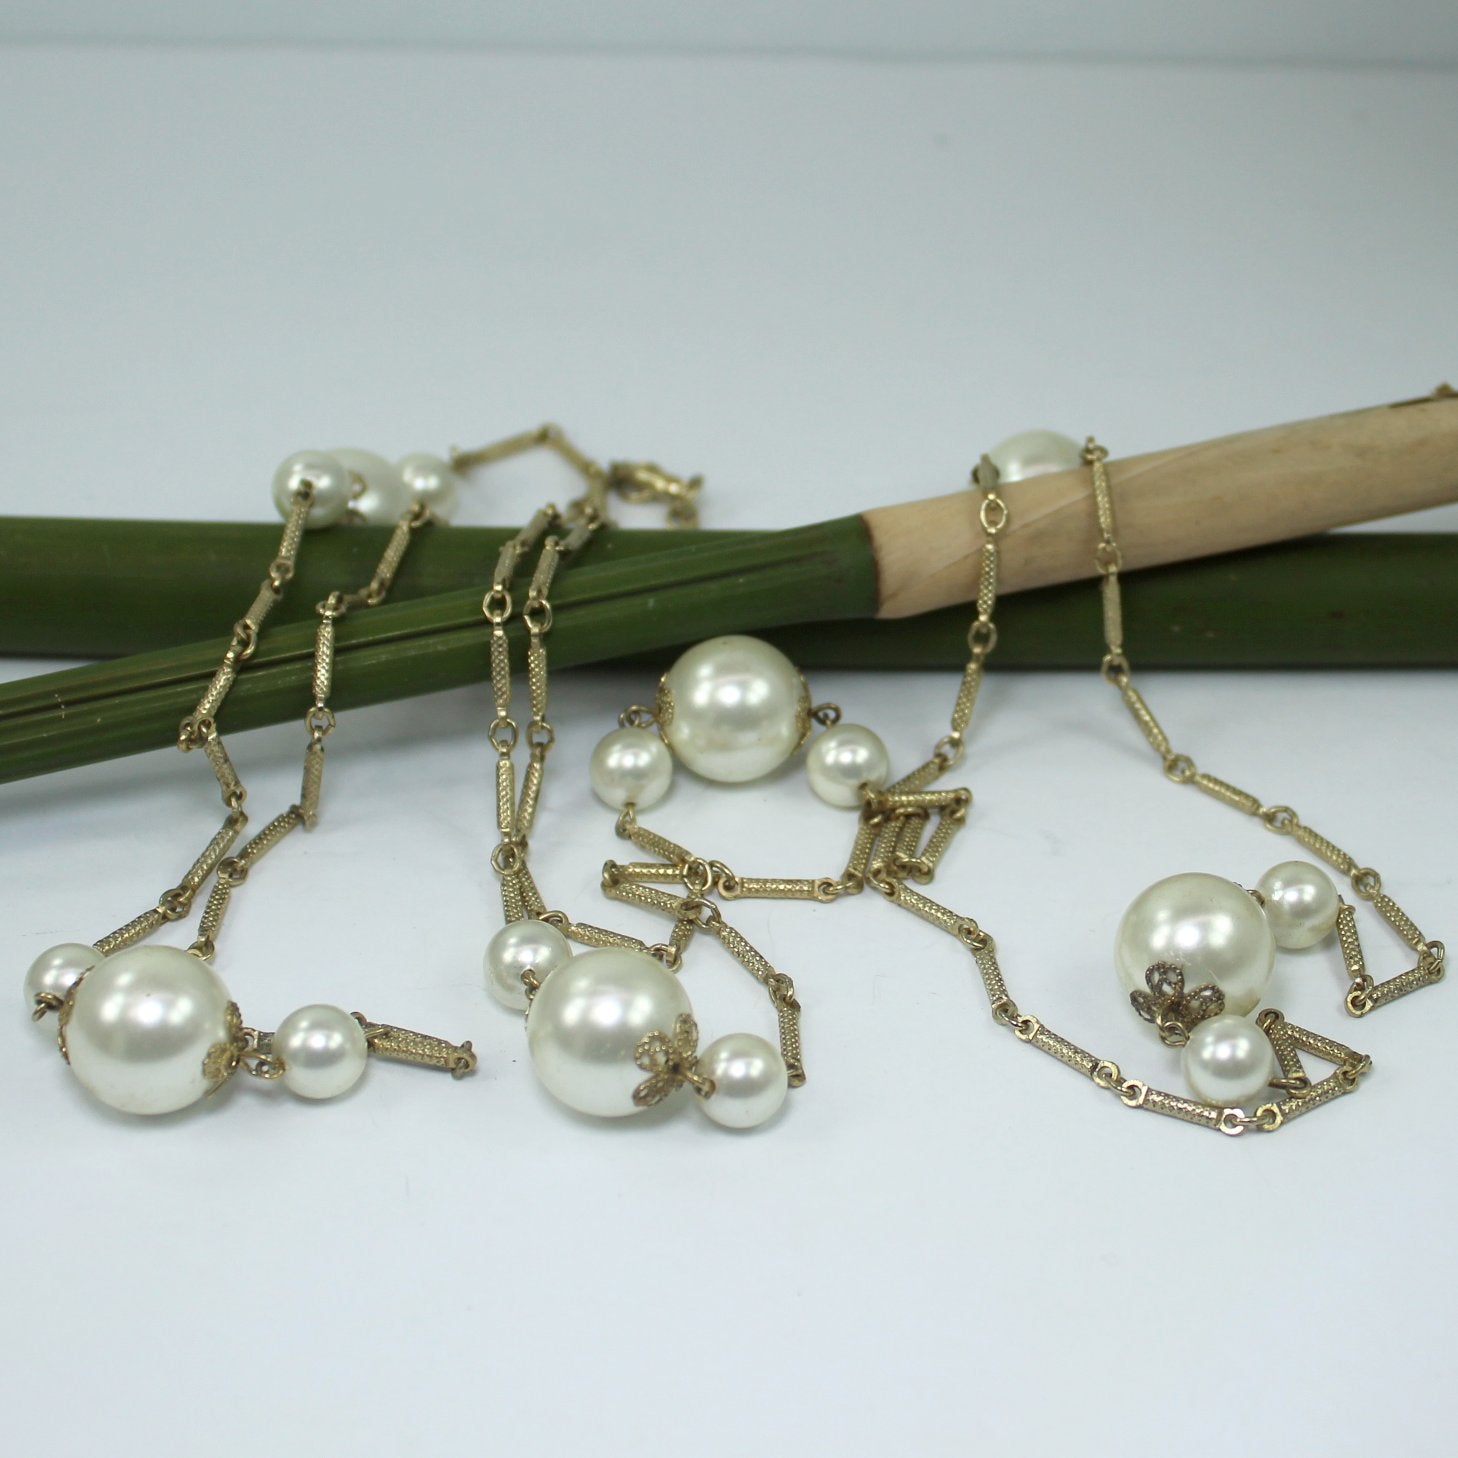 Coro 60" Long Vintage Necklace Pearls Gold Tone Chain Links of neck view of chain